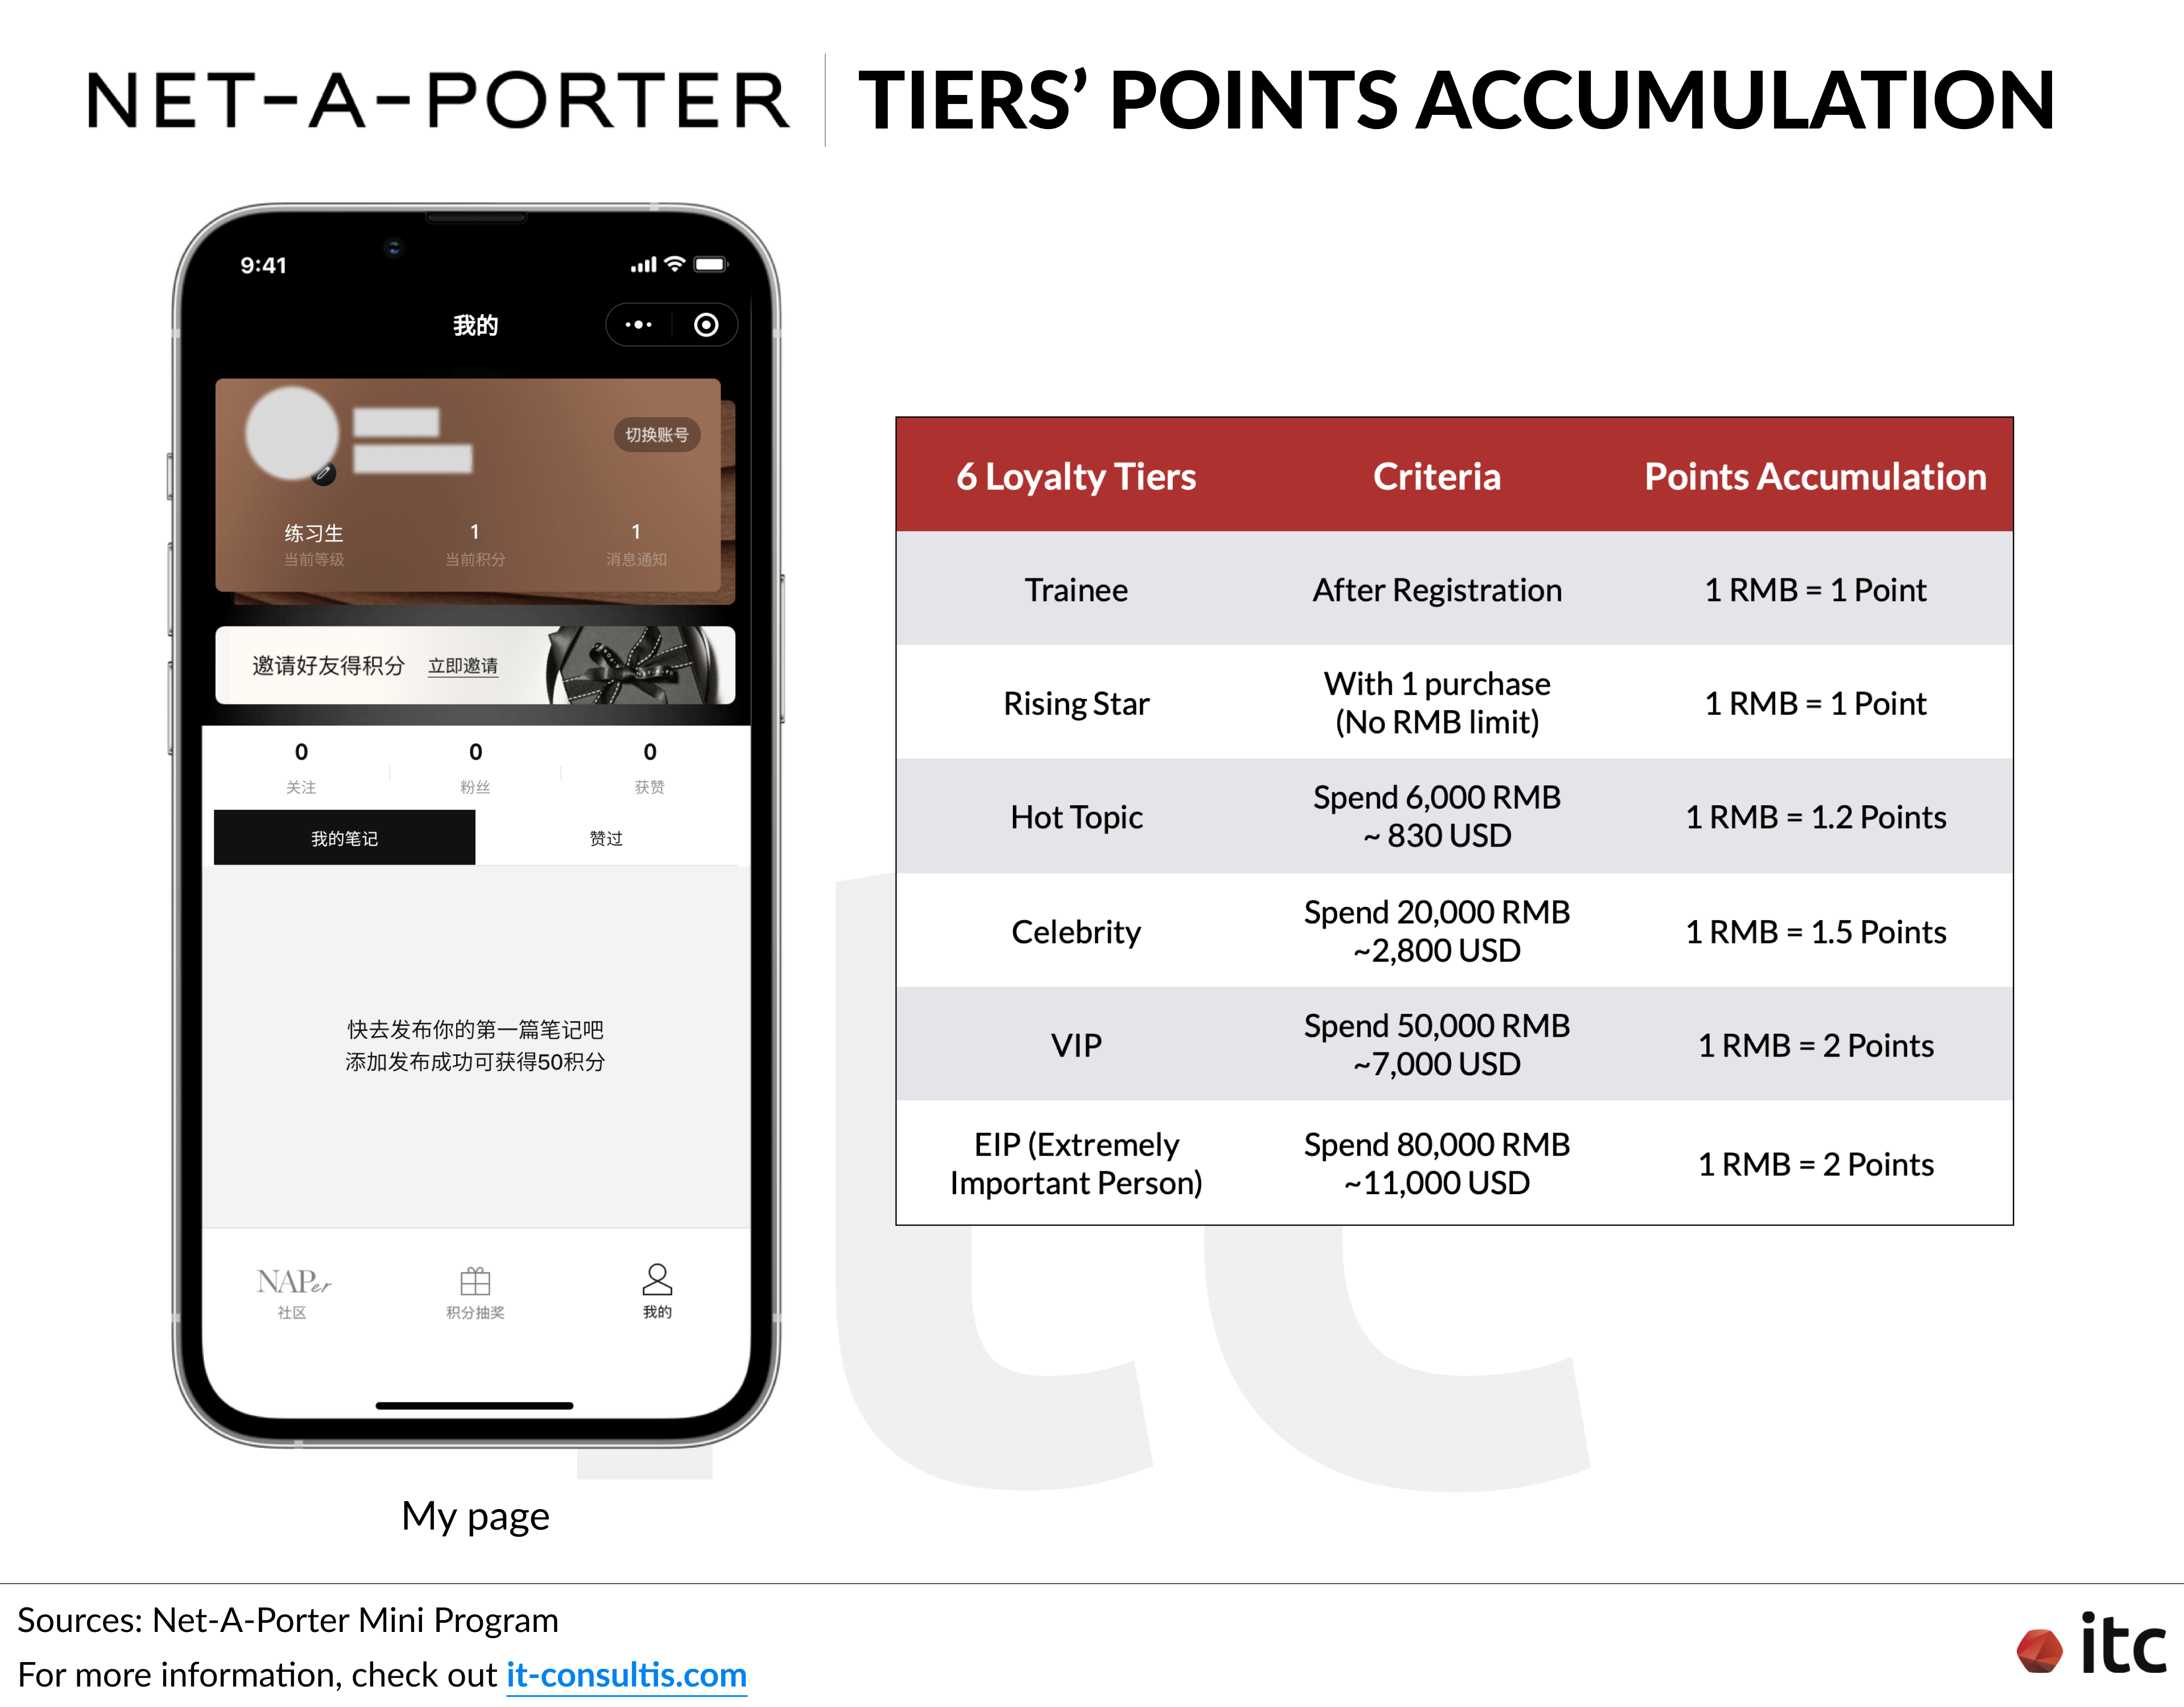 Net-A-Pointer allows higher loyalty tiers to accumulate points more easily